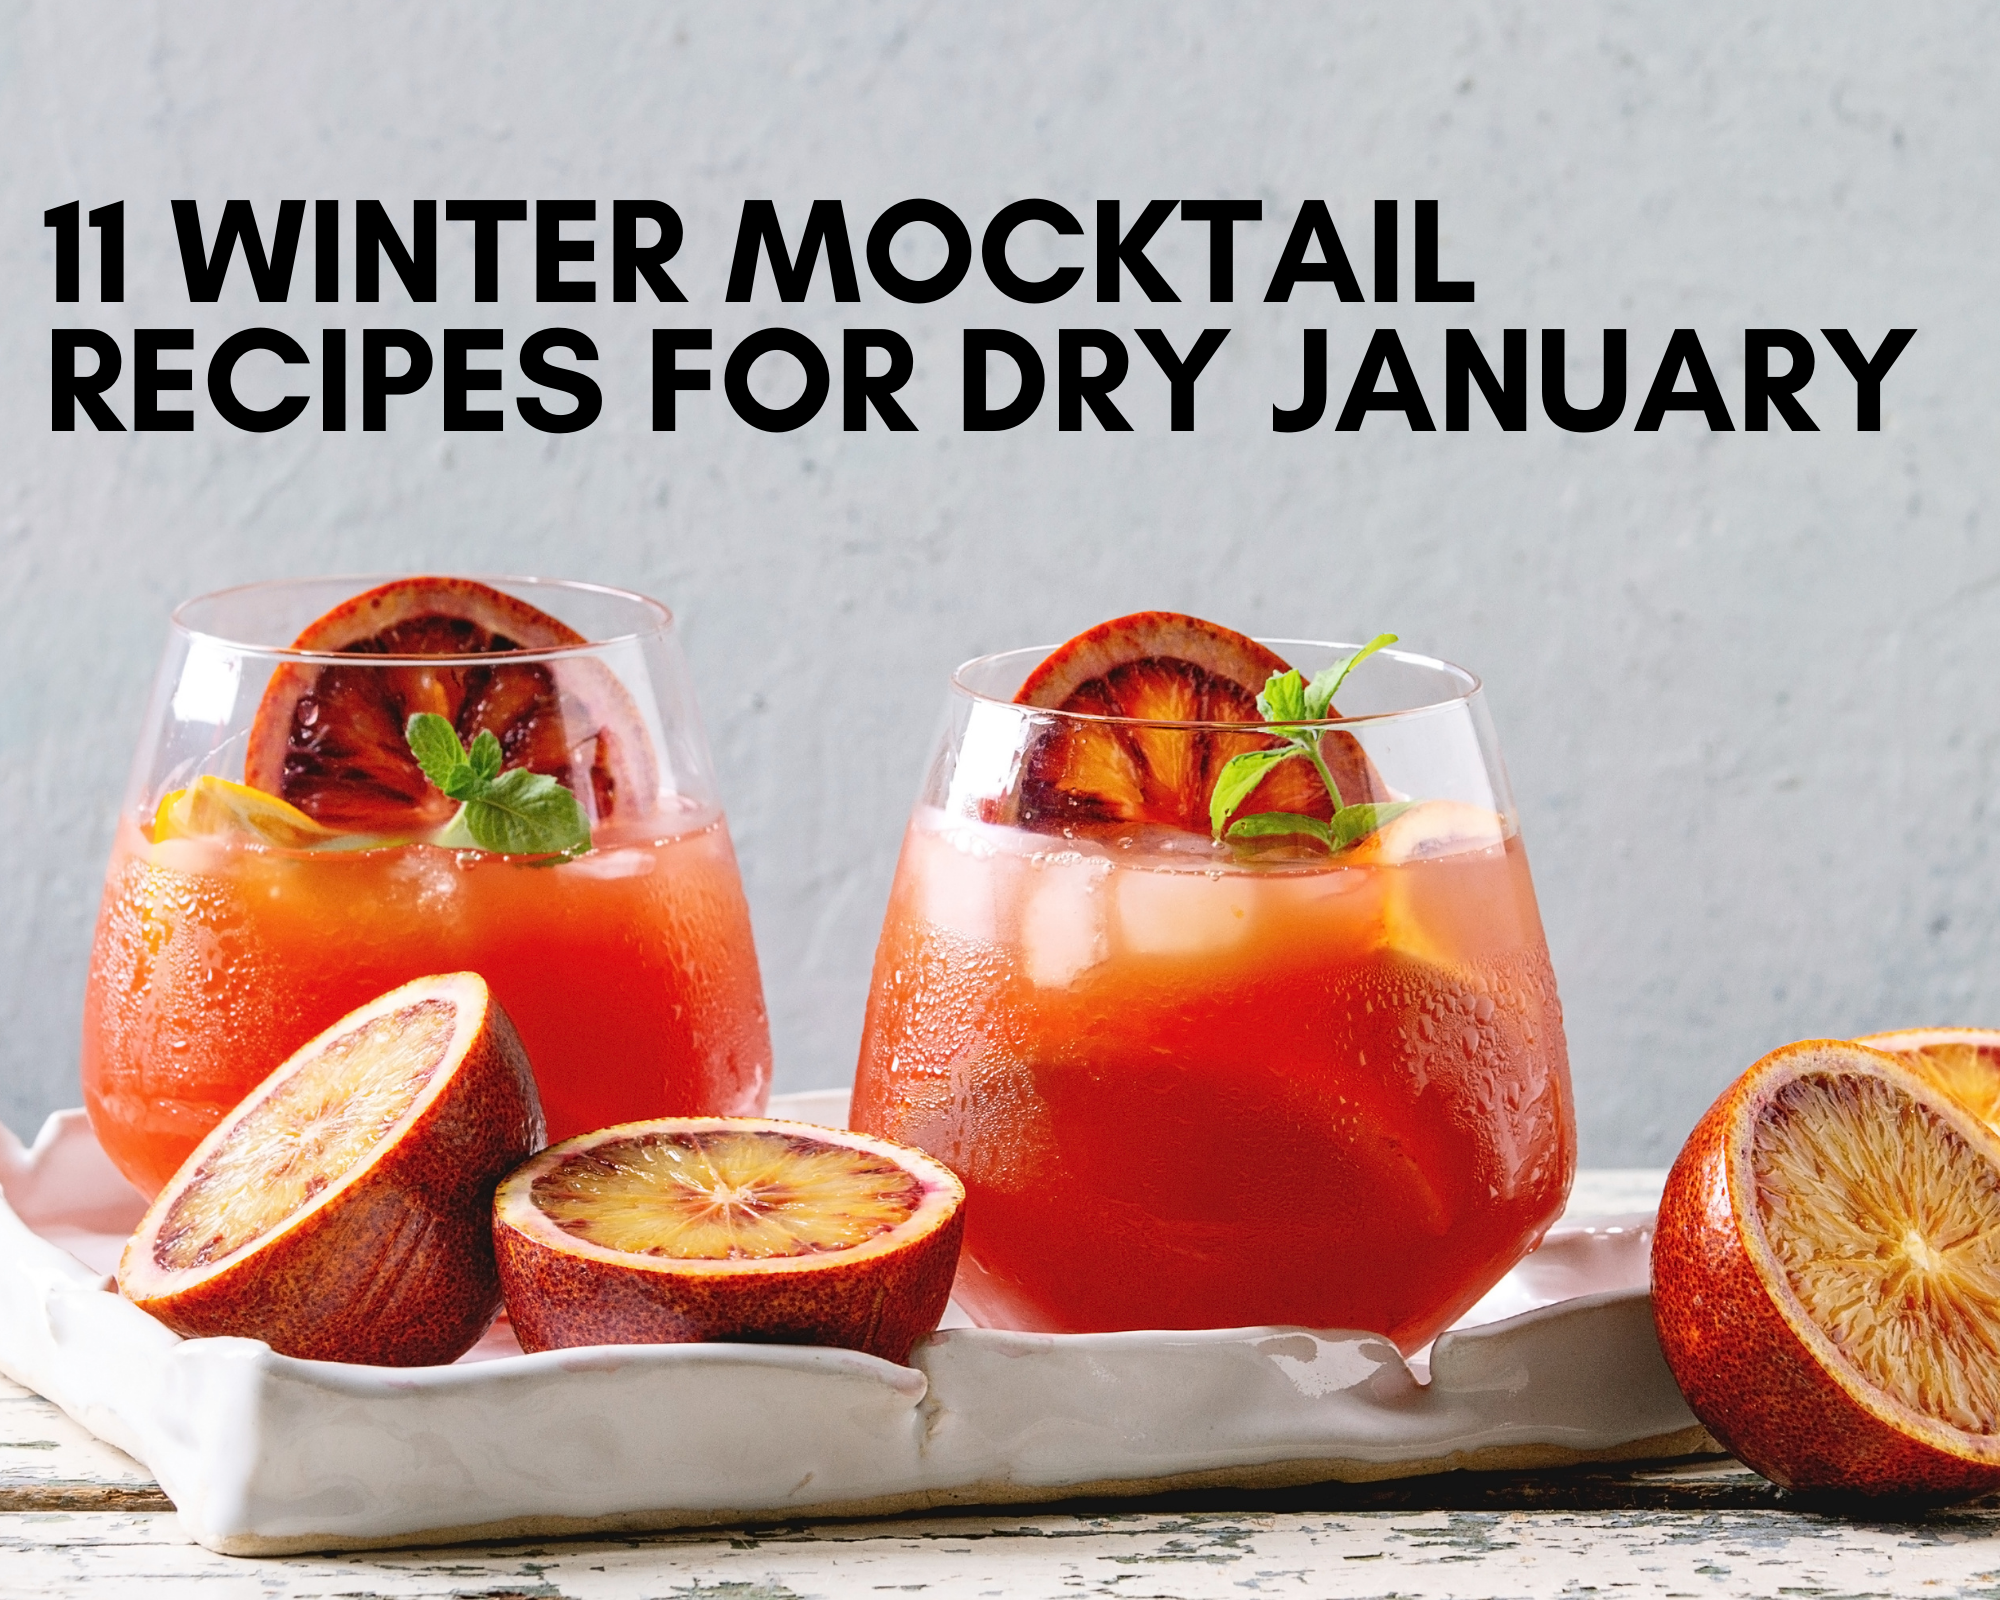 mocktail recipes for dry january